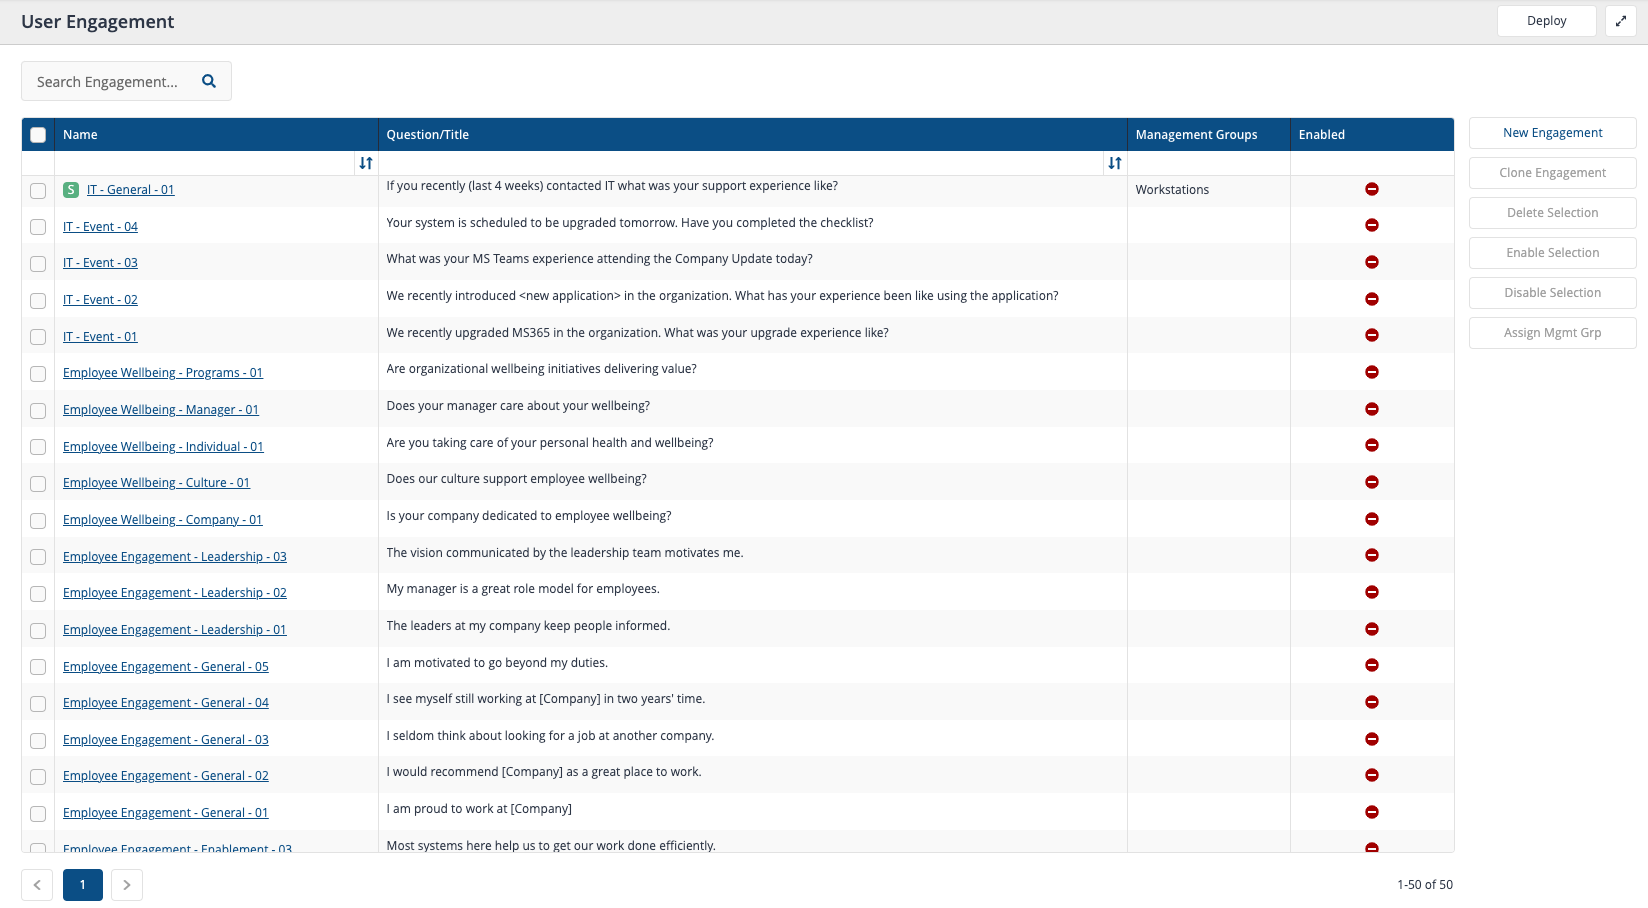 User Engagement Landing Page searchable table